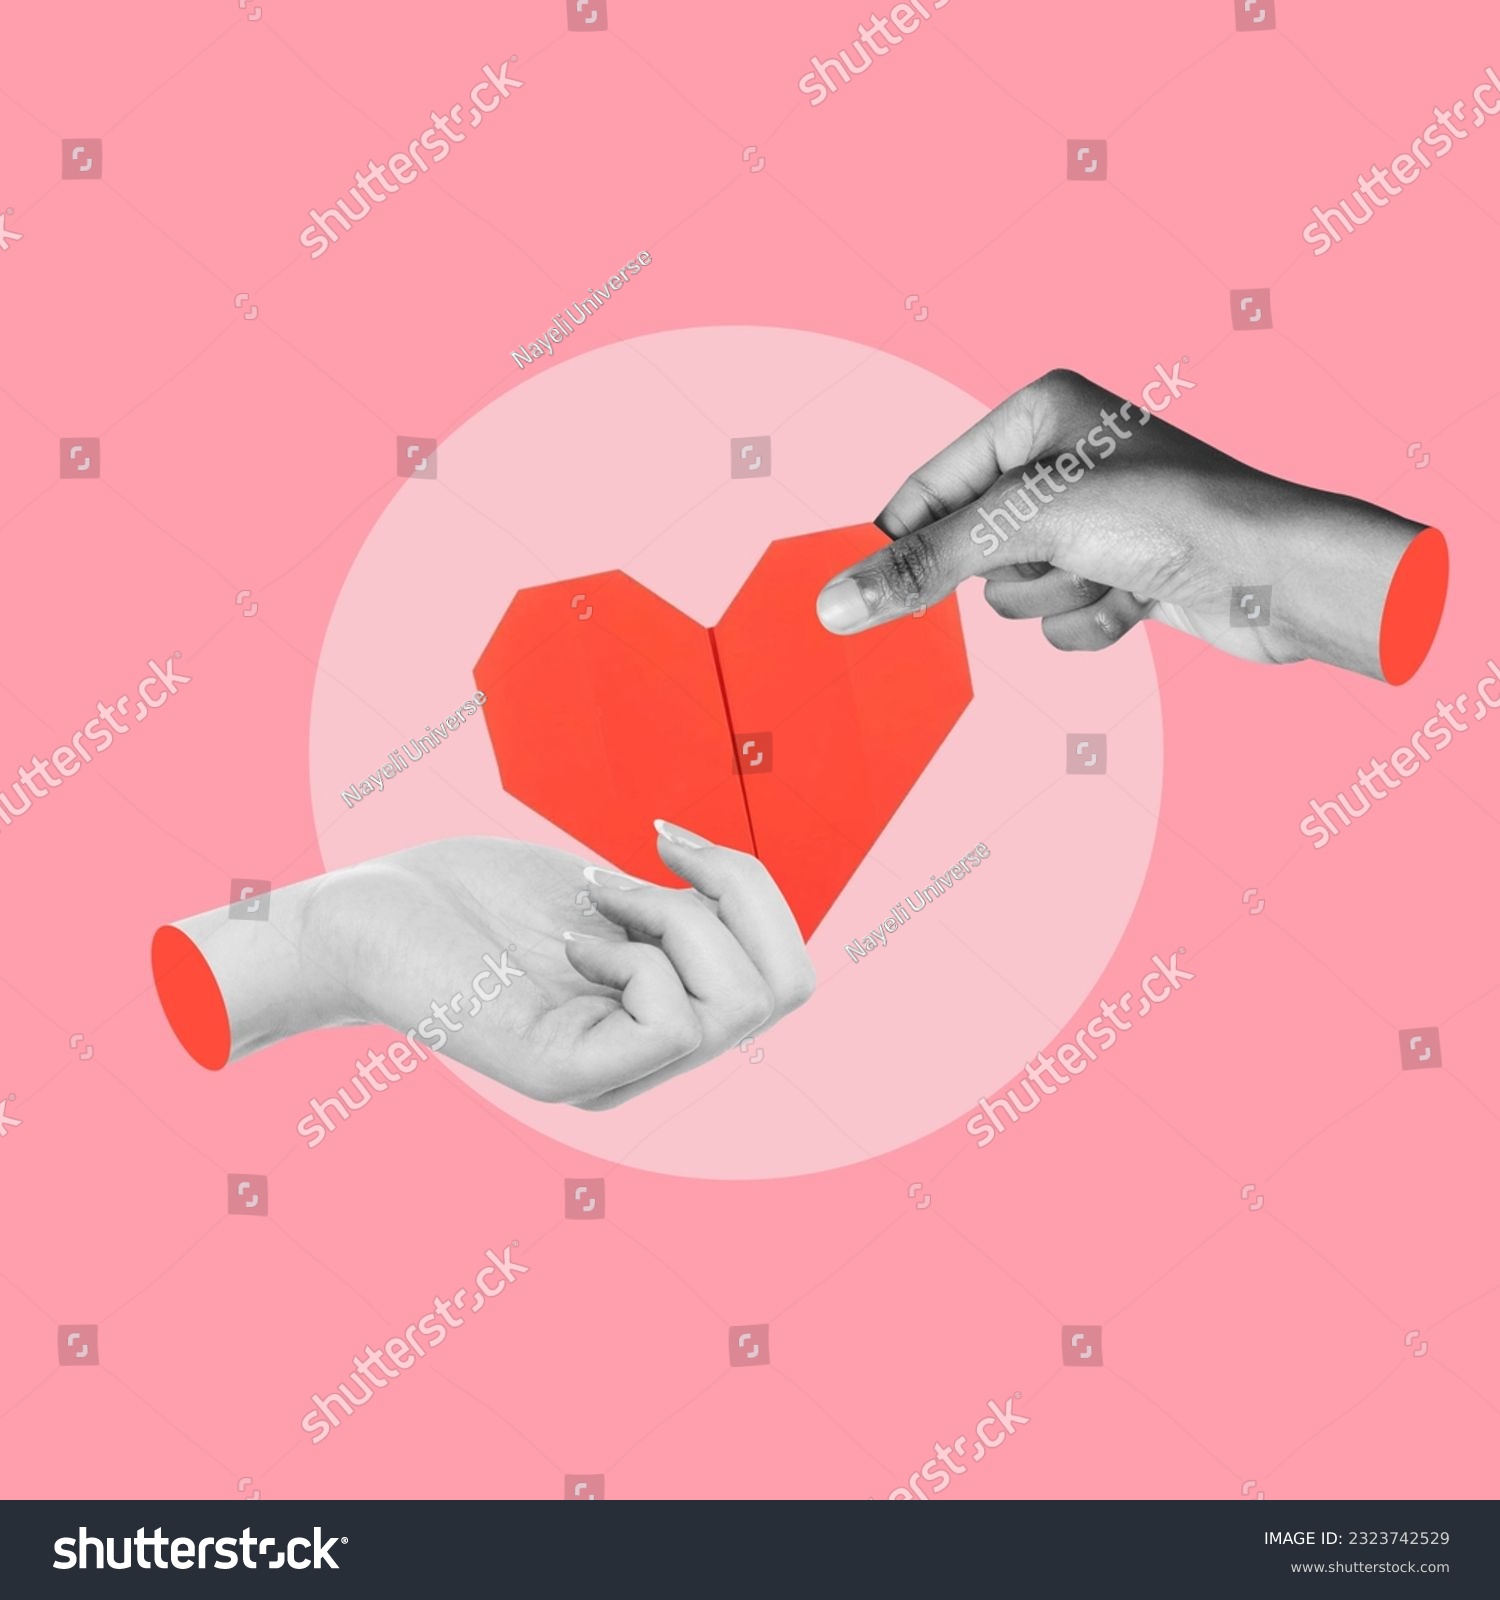 love in a couple, hand with heart, hands of a couple, paper heart, heart origami, commitment in a couple, mutual love, taking heart, day of love, collage art, photo collage #2323742529